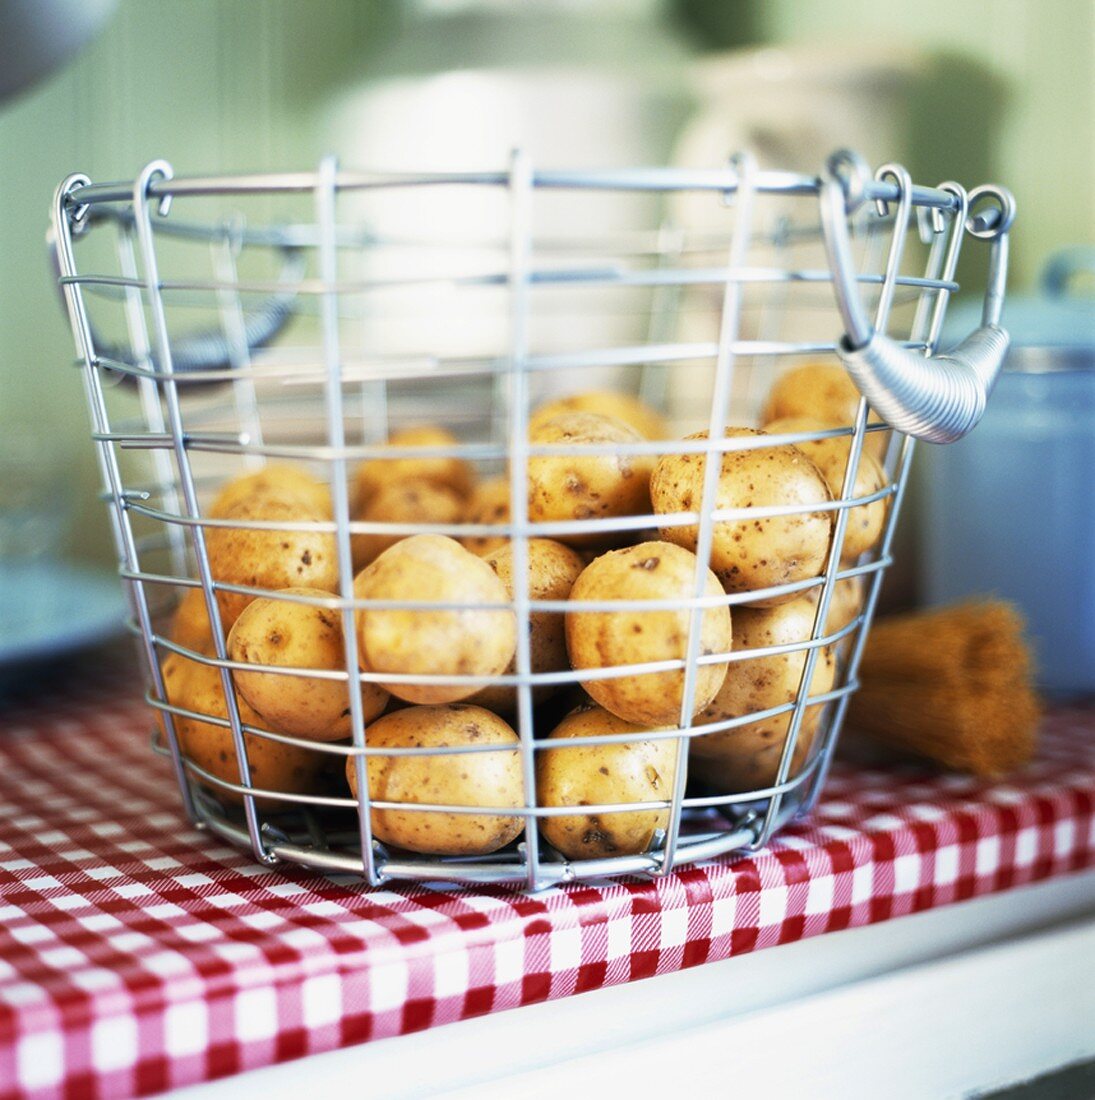 Potatoes in wire basket on kitchen table